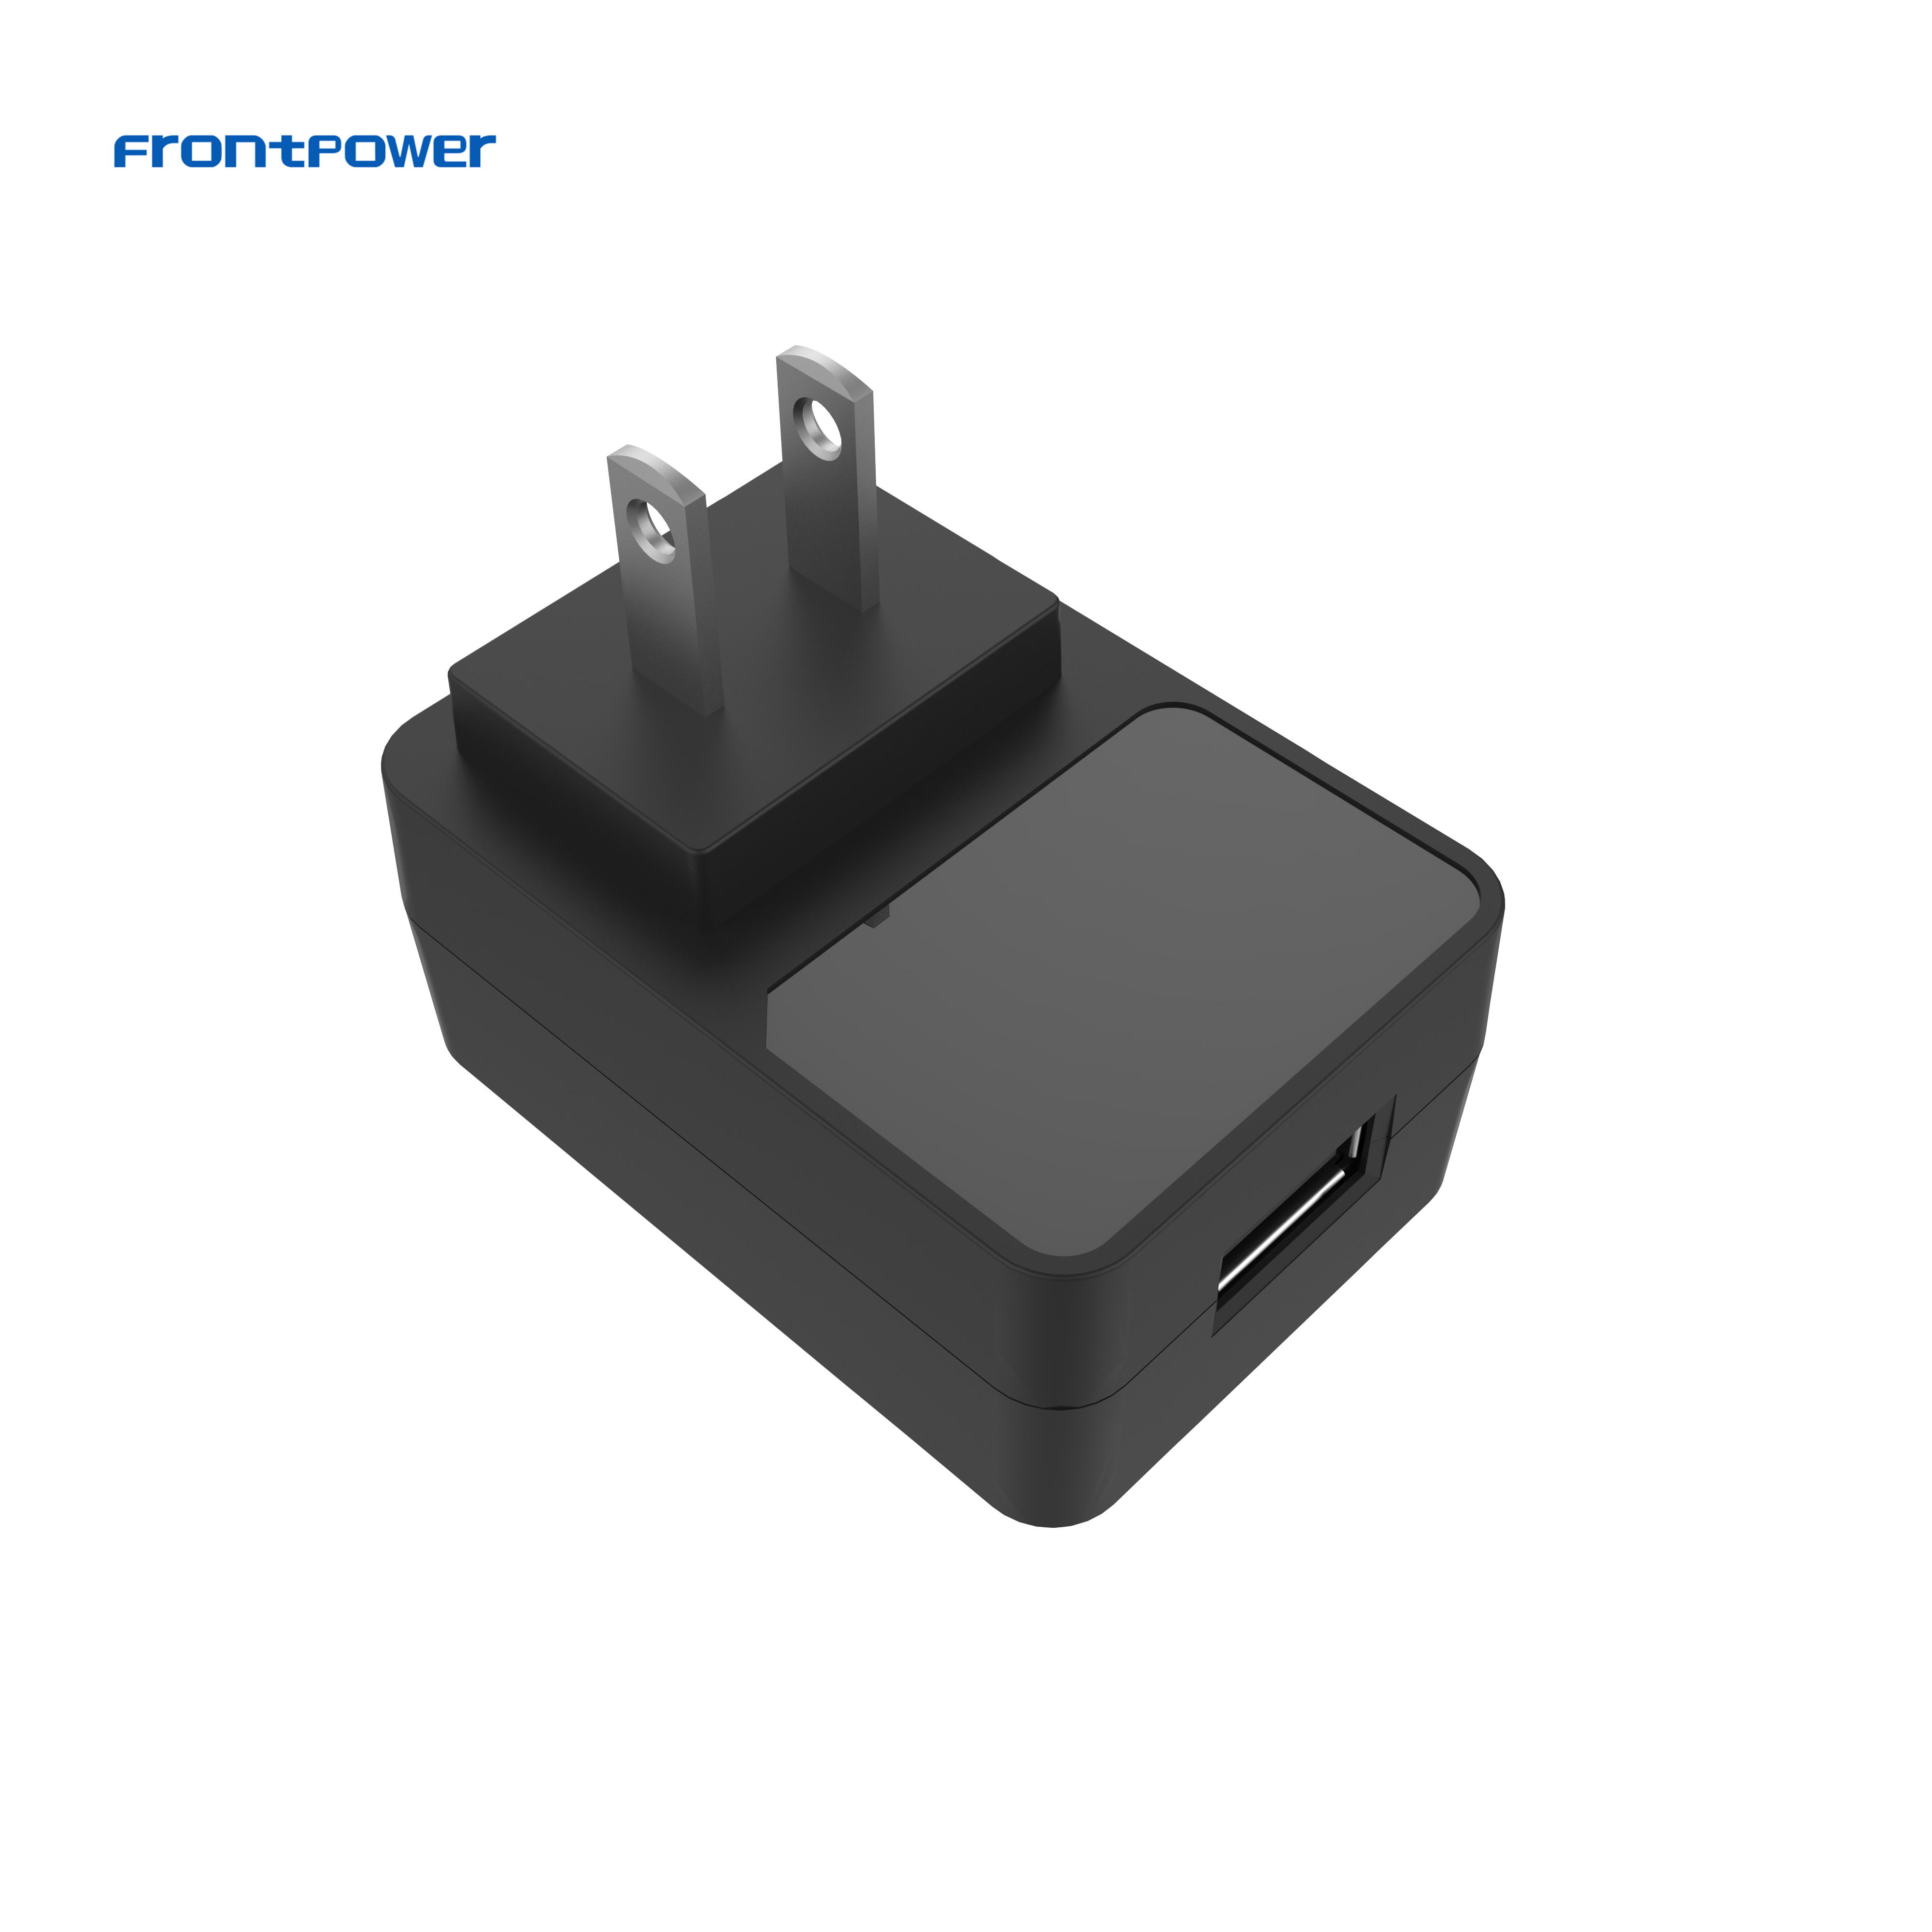 Frontpower USB power adapter 5V 2.4A phone wireless charger with UL FCC for travel